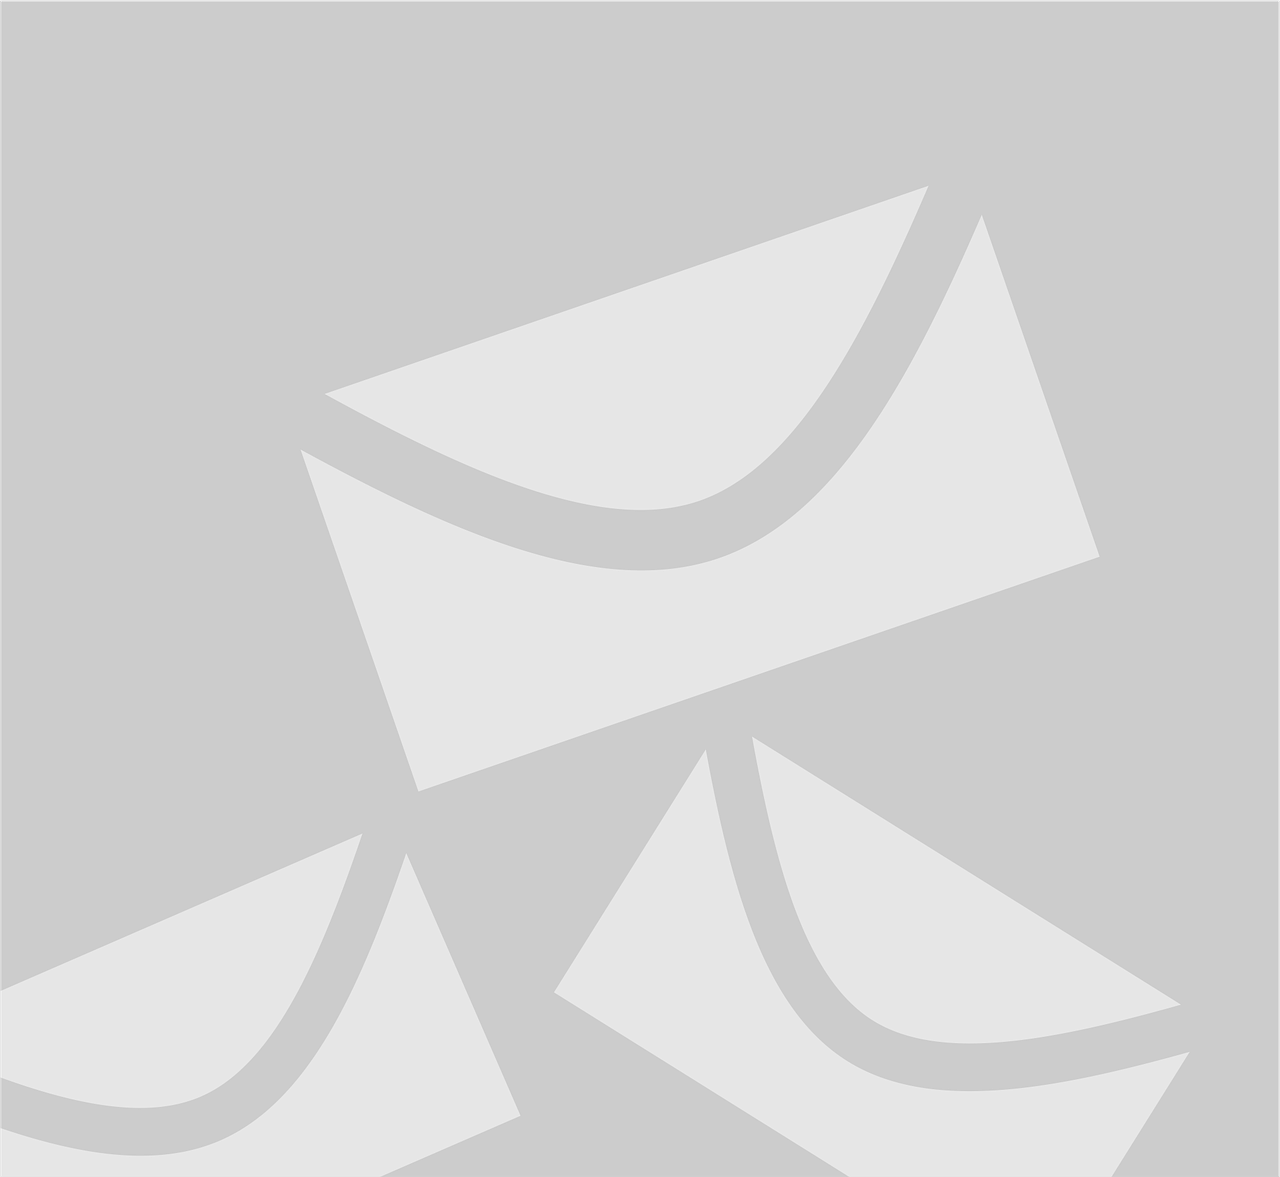 a couple of envelopes sitting on top of each other, a cartoon, by Marten Post, trending on pixabay, postminimalism, iphone wallpaper, grey, 3 - piece, avatar image